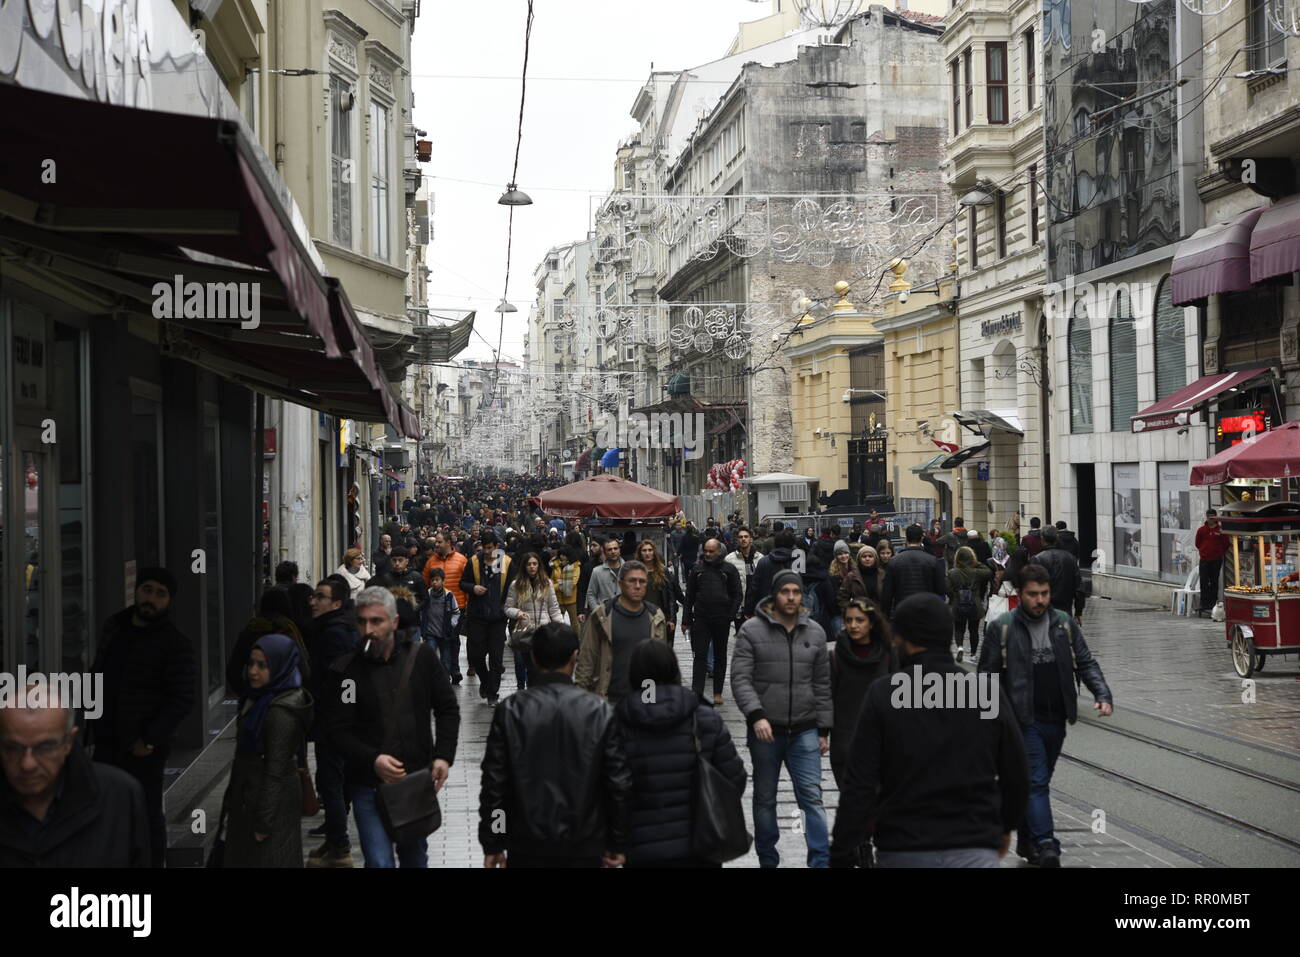 People crowded in Istiklal street in Istanbul, Turkey Stock Photo